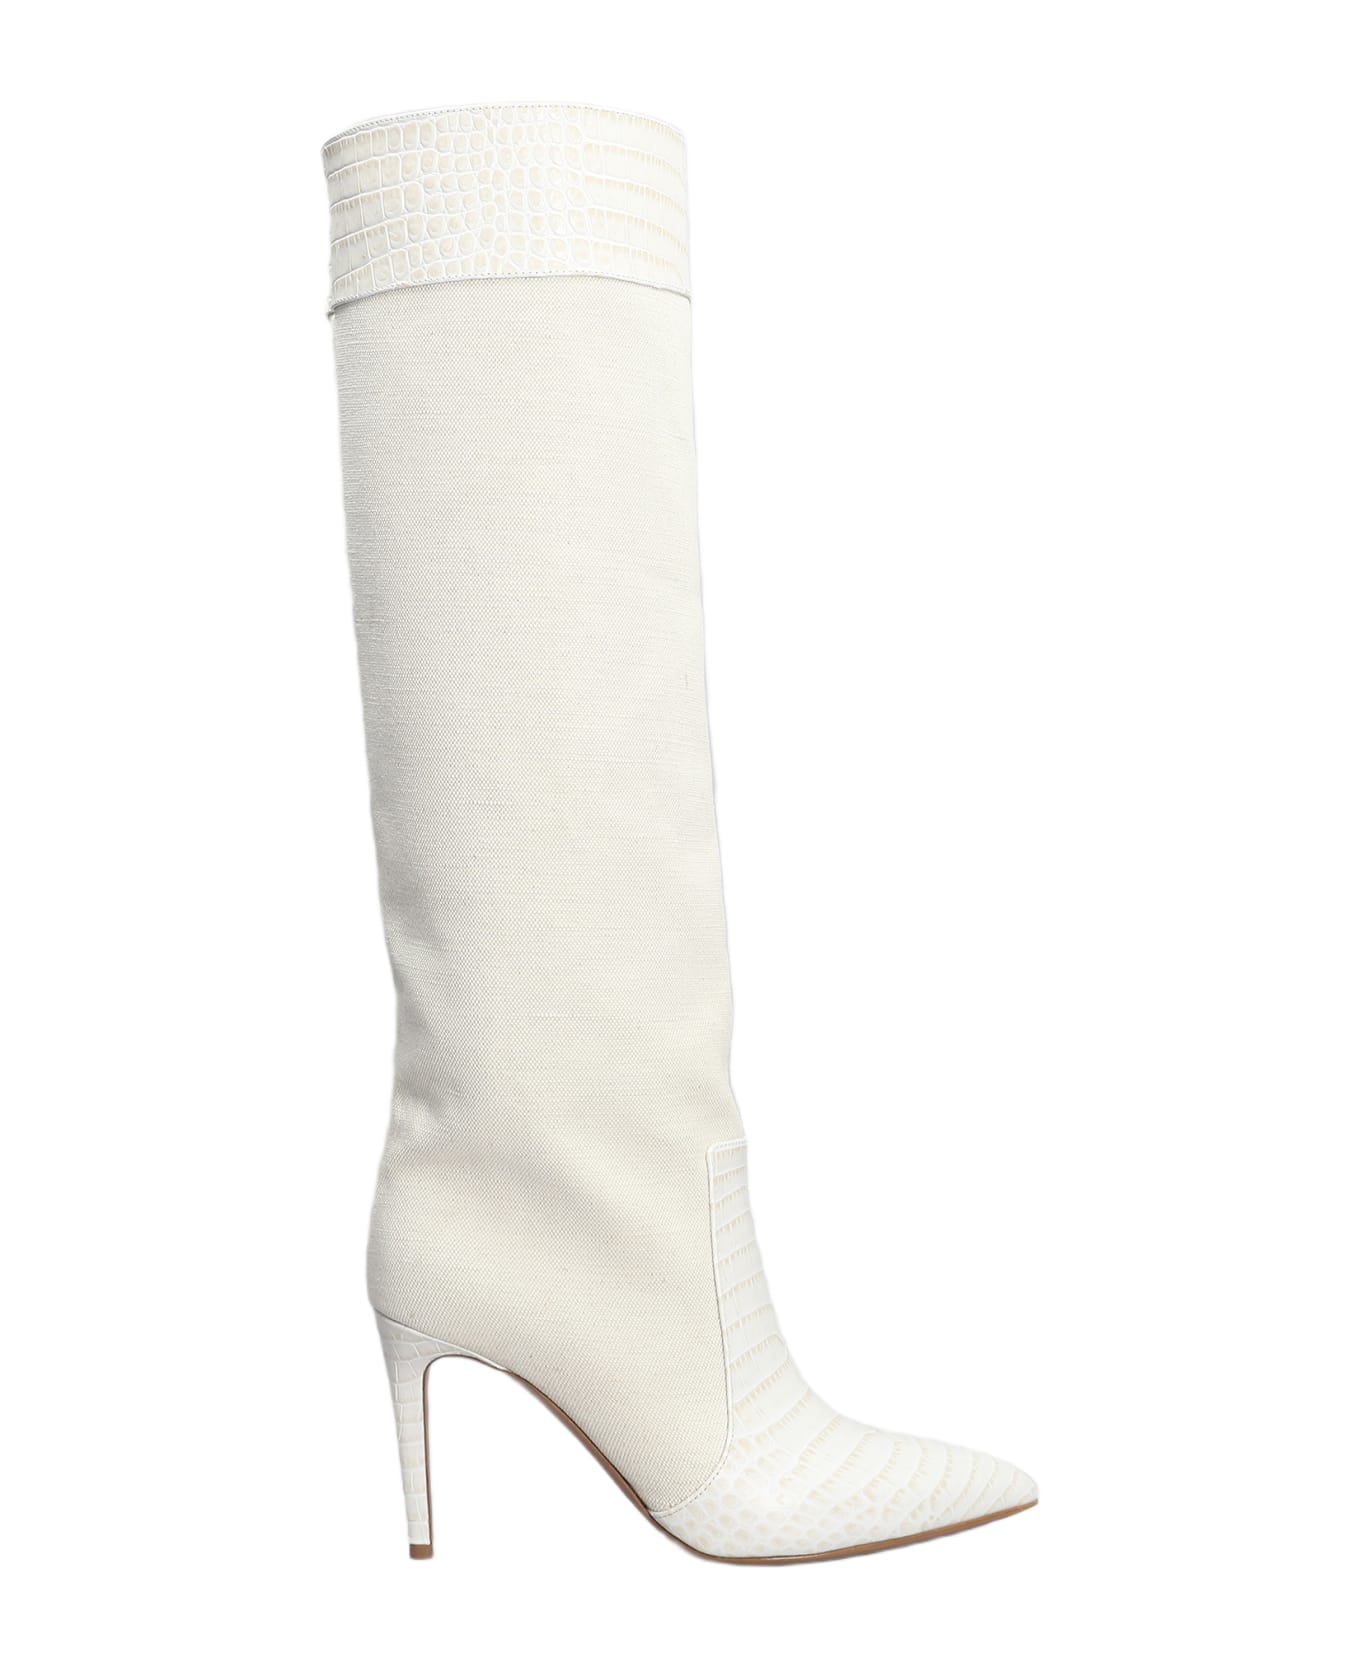 Paris Texas High Heels Boots In Beige Leather And Fabric - beige